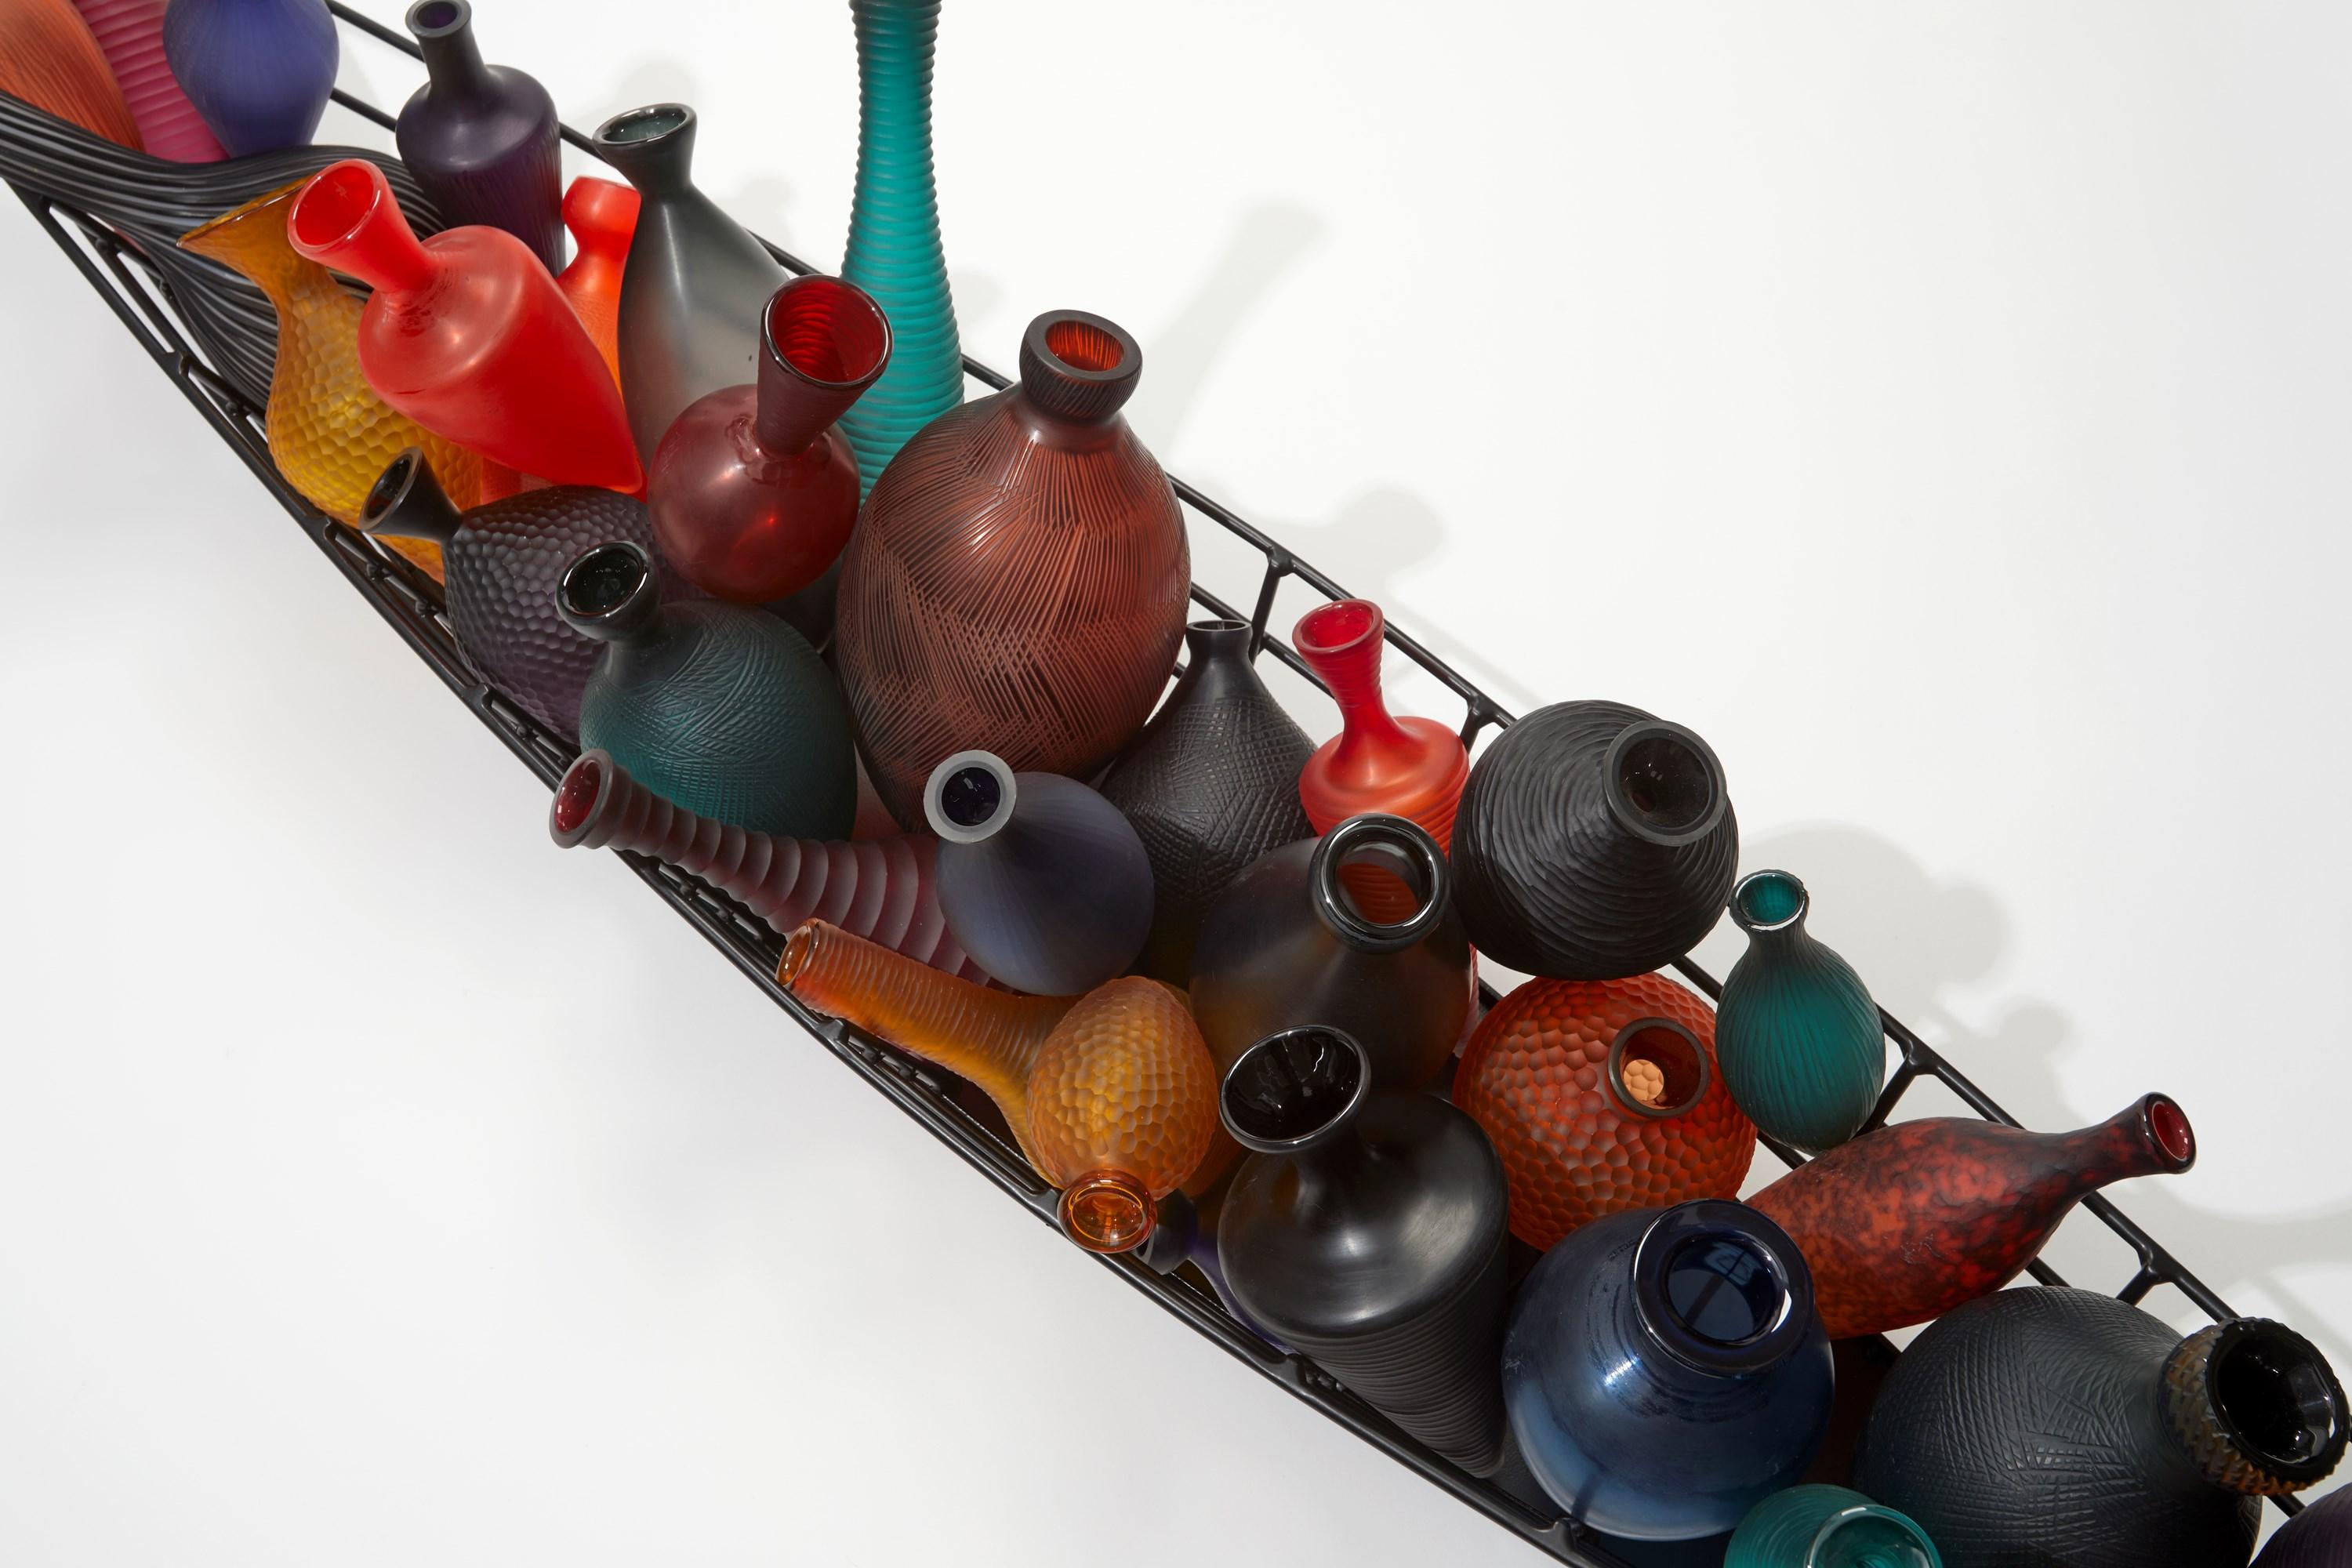 British Return of History, a Colourful Boat Glass Sculpture by Baldwin & Guggisberg